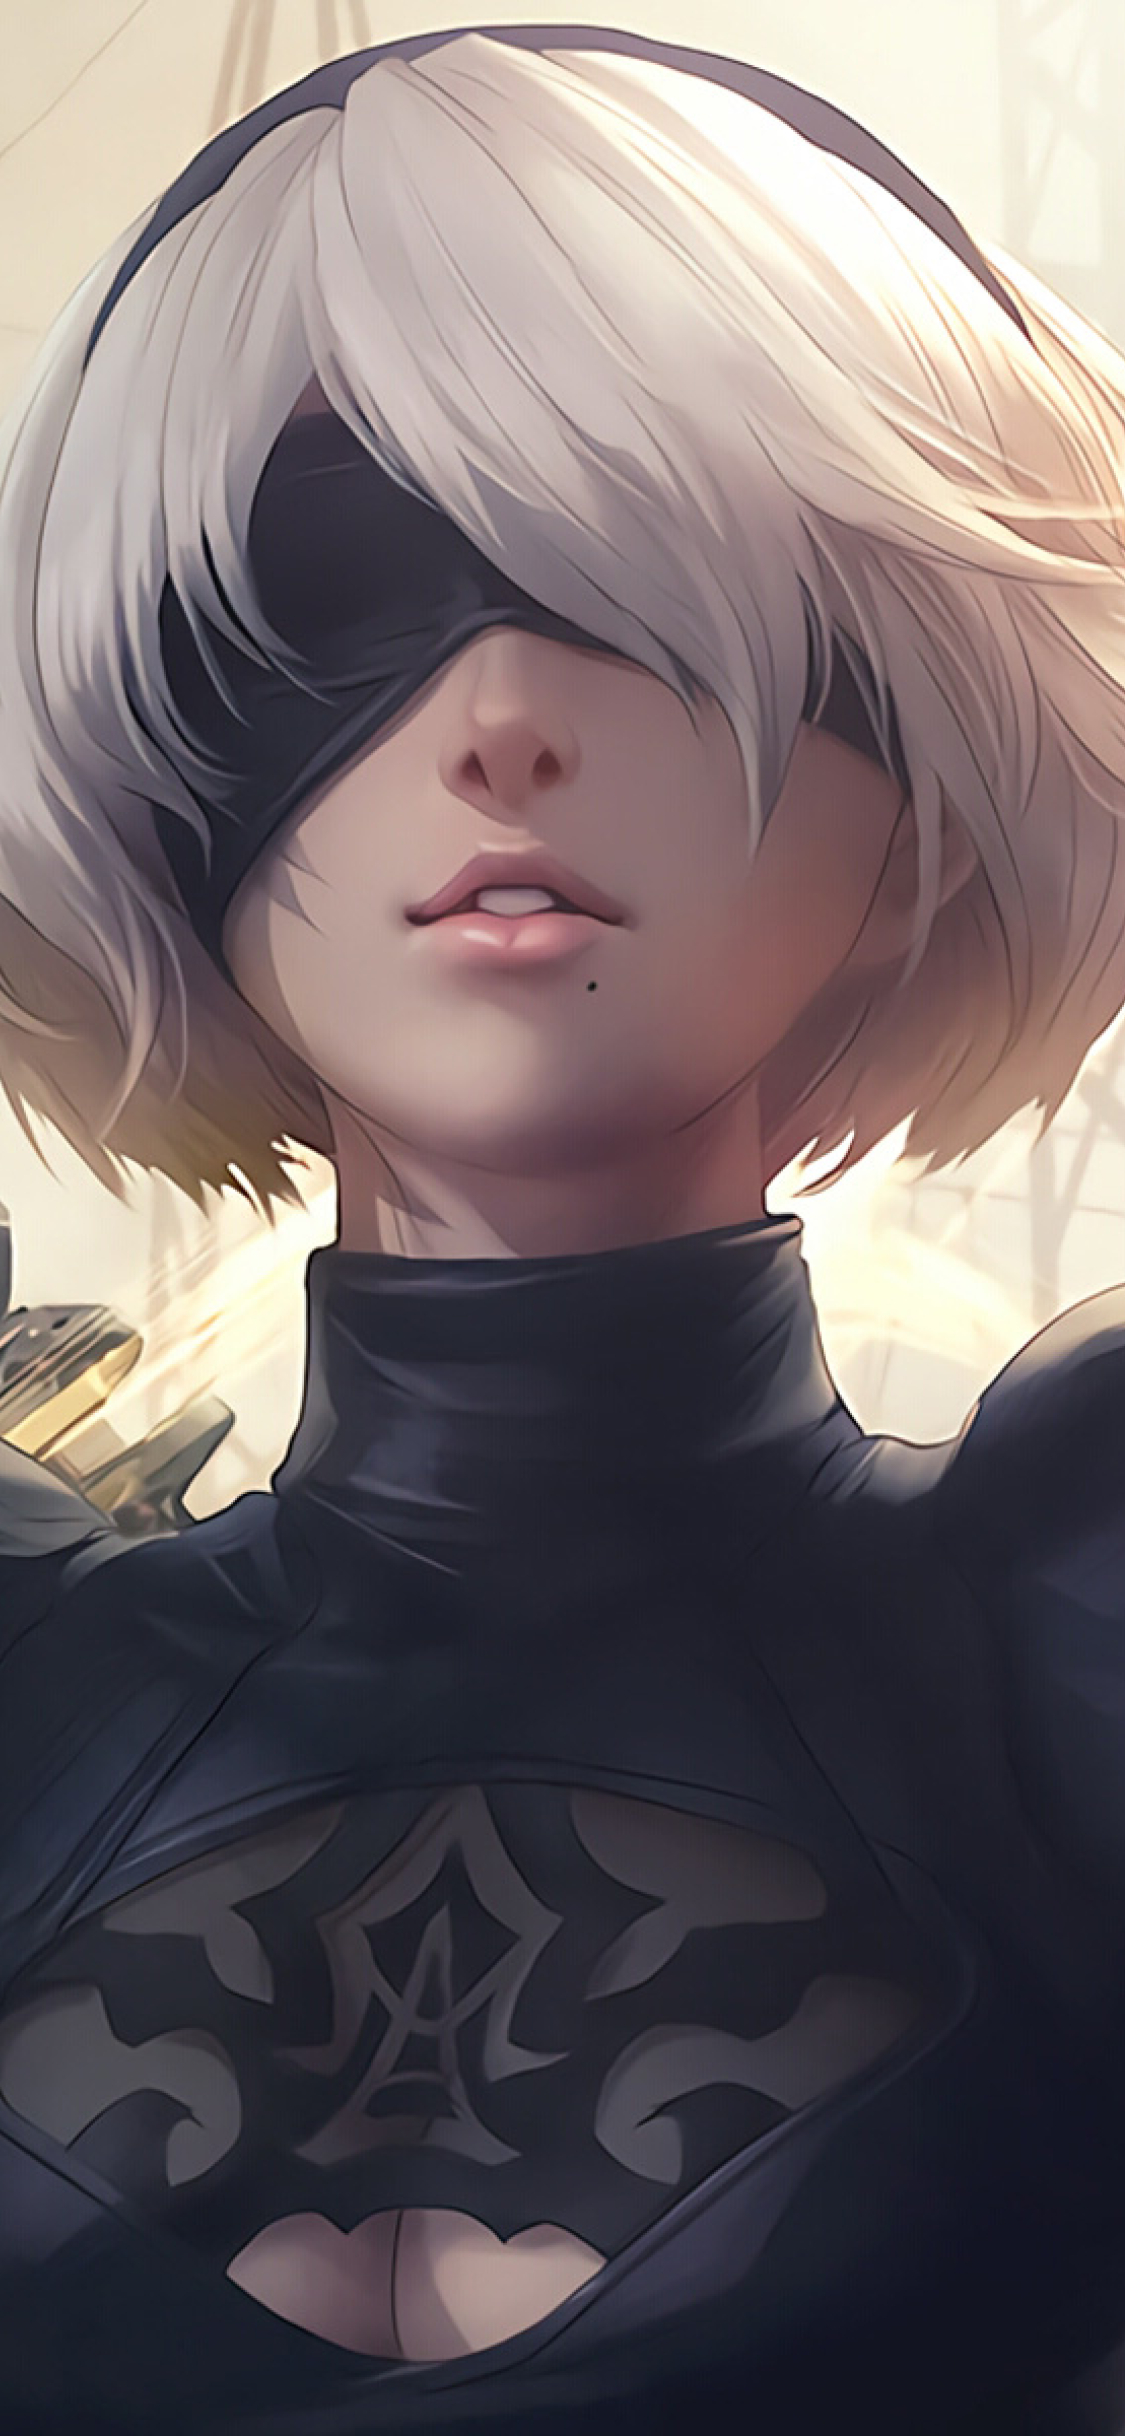 1125x2436 2b Nier Automata Iphone Xs Iphone 10 Iphone X Wallpaper Hd Anime 4k Wallpapers Images Photos And Background